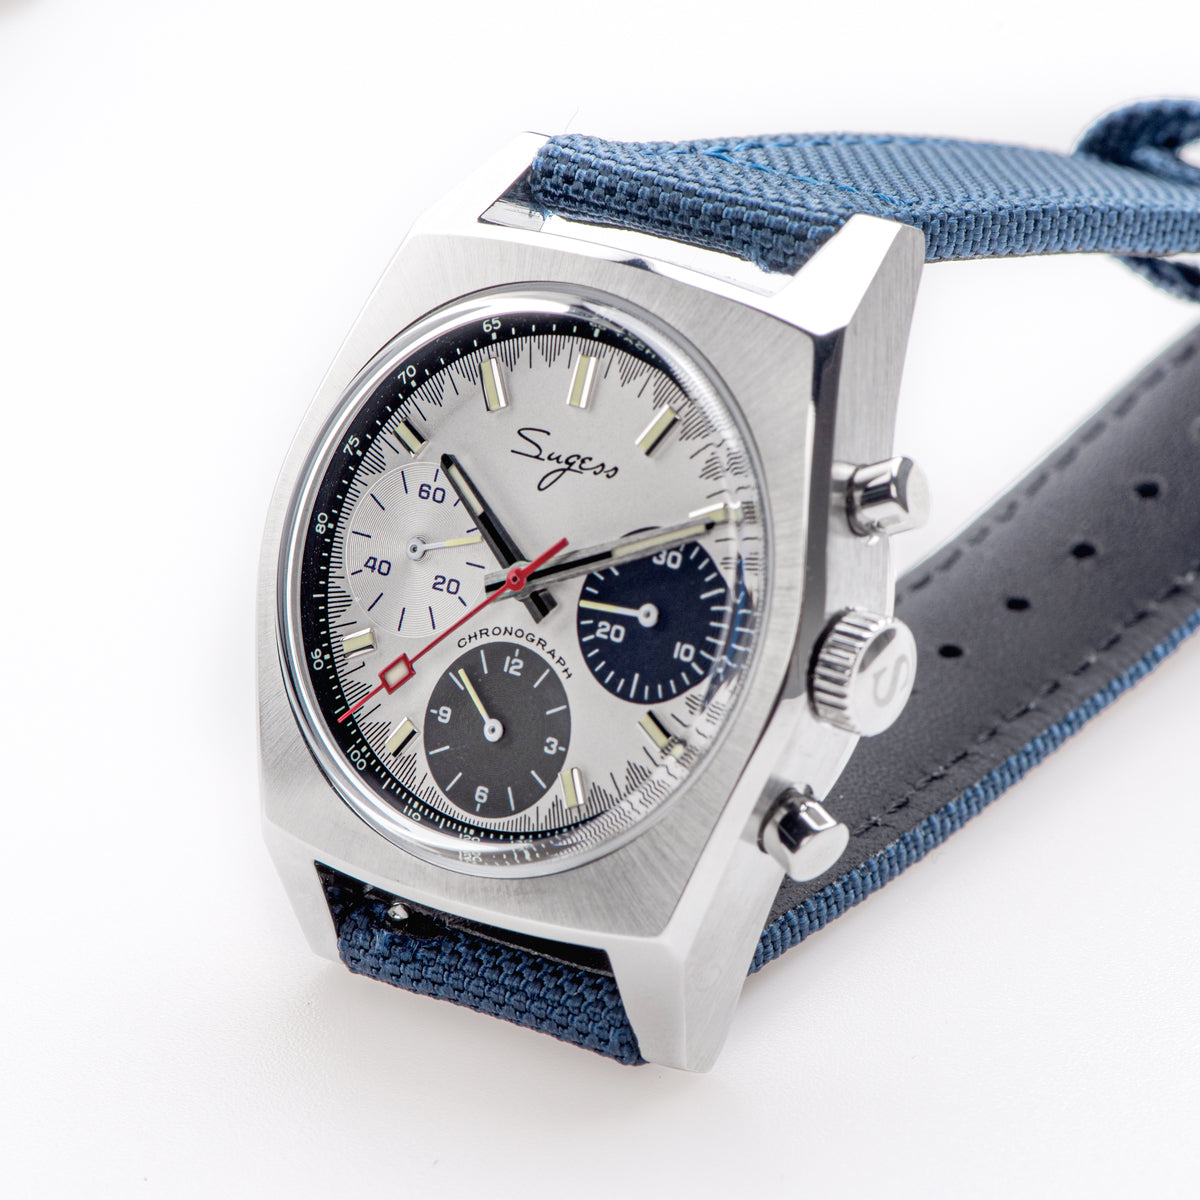 Chrono Heritage S419 Chronograph Special Dial